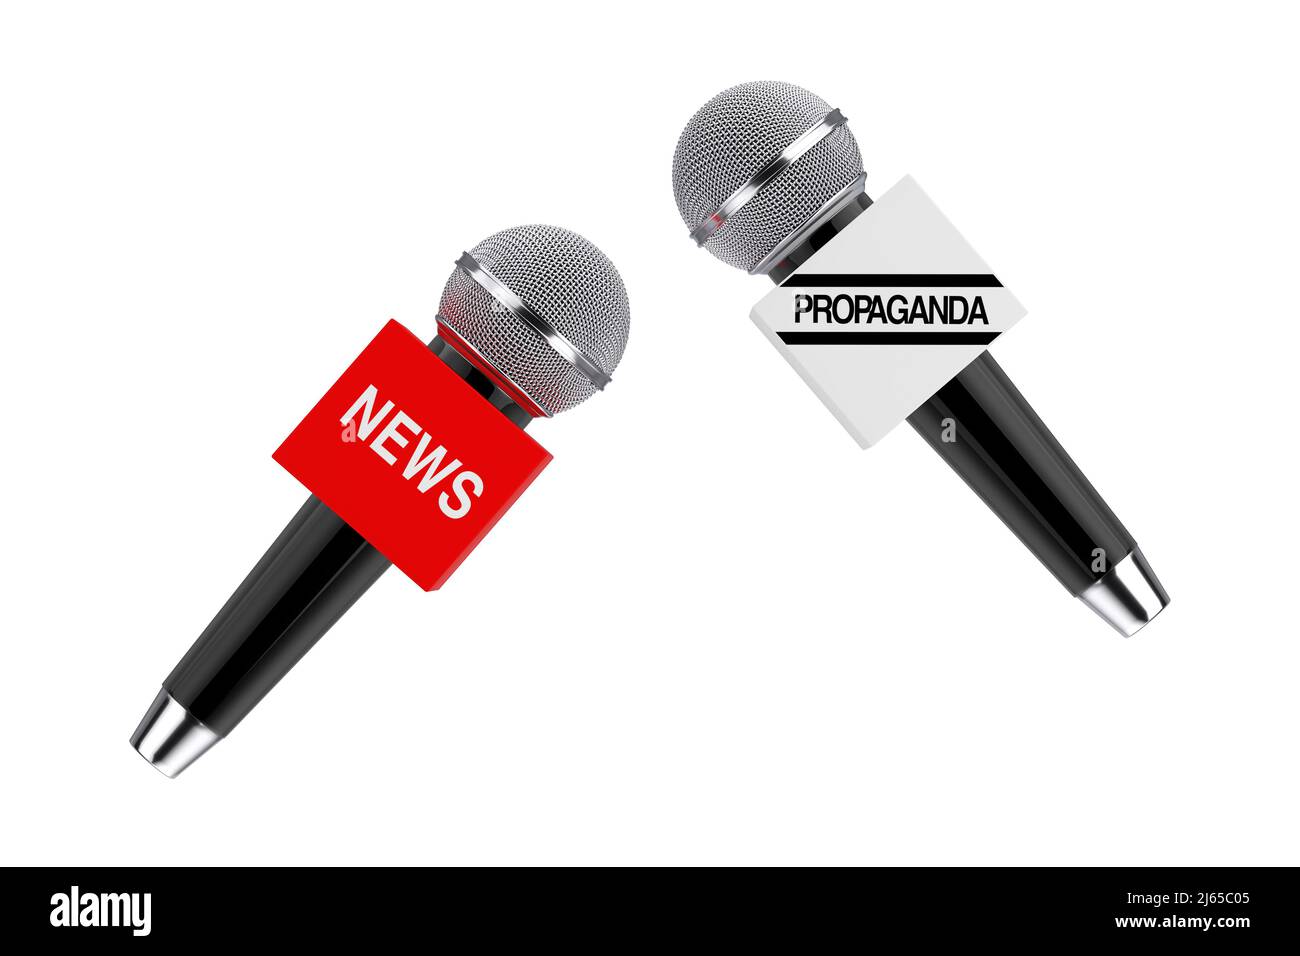 Free Media Against Disinformation and Propaganda Concept.  Microphone with News Sign Against Microphone with Propaganda Sign on a white background. 3d Stock Photo